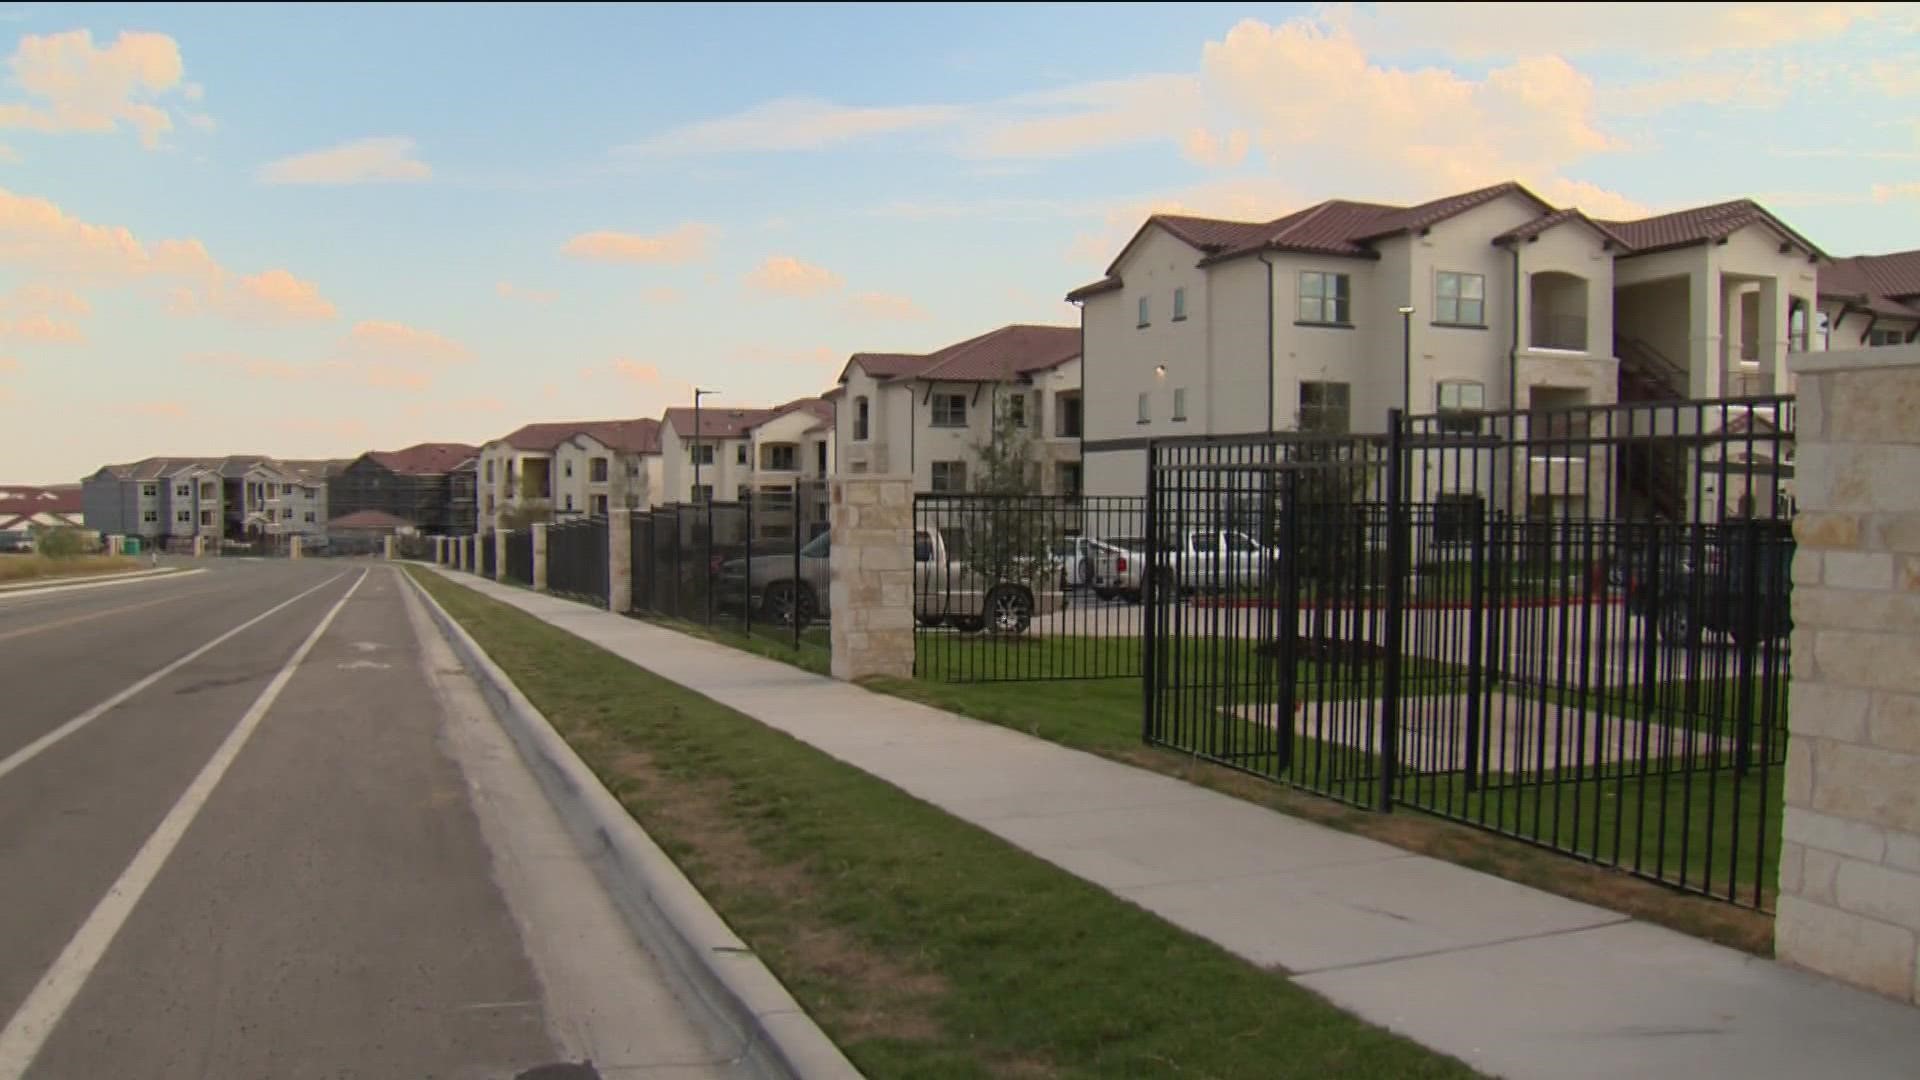 City leaders say over half of Austinites are renters and say renter rights are not as strong as they should be. Some councilmembers hope to change that.